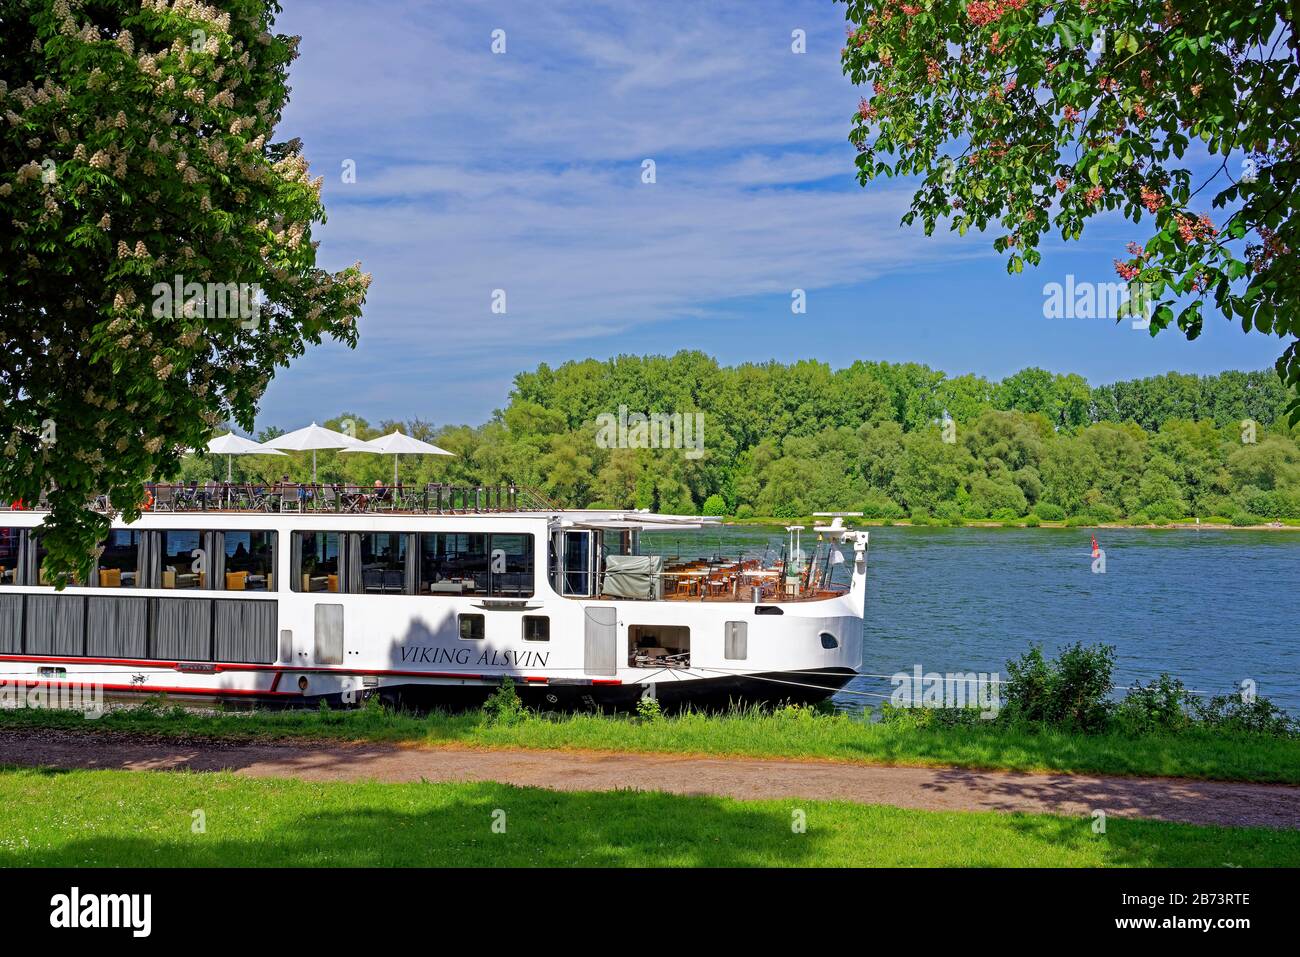 Germany, Rhineland-Palatinate, Speyer, Rhine avenue, SchUM town, river, the Rhine, river cruise ship, chestnut tree, blossoms, red, knows, plants, tre Stock Photo